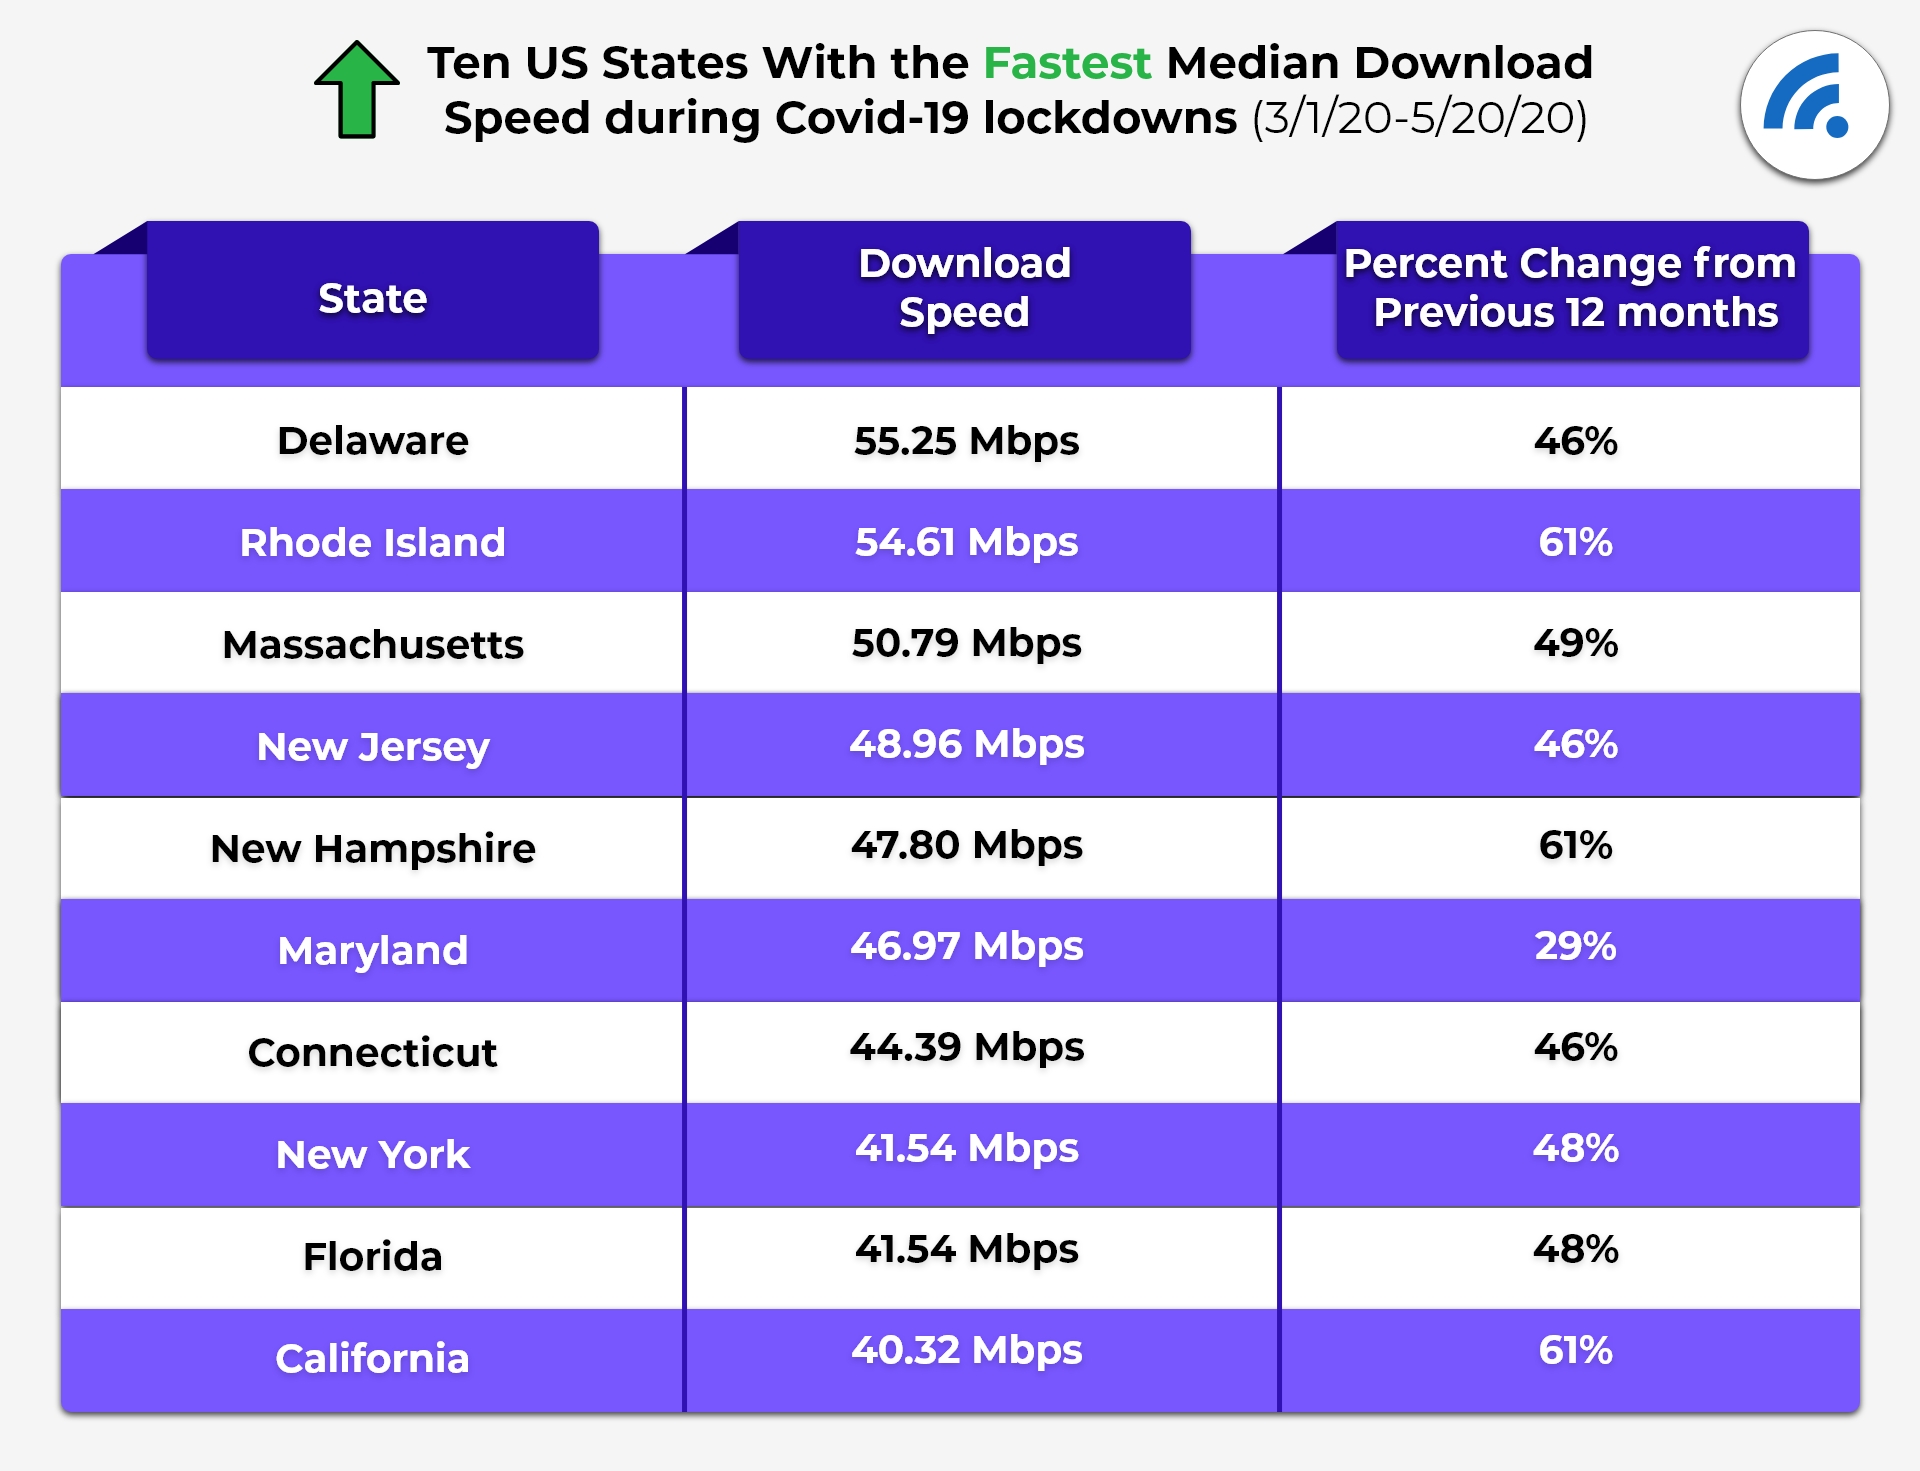 States With The Fatest Median Download During COVID-19